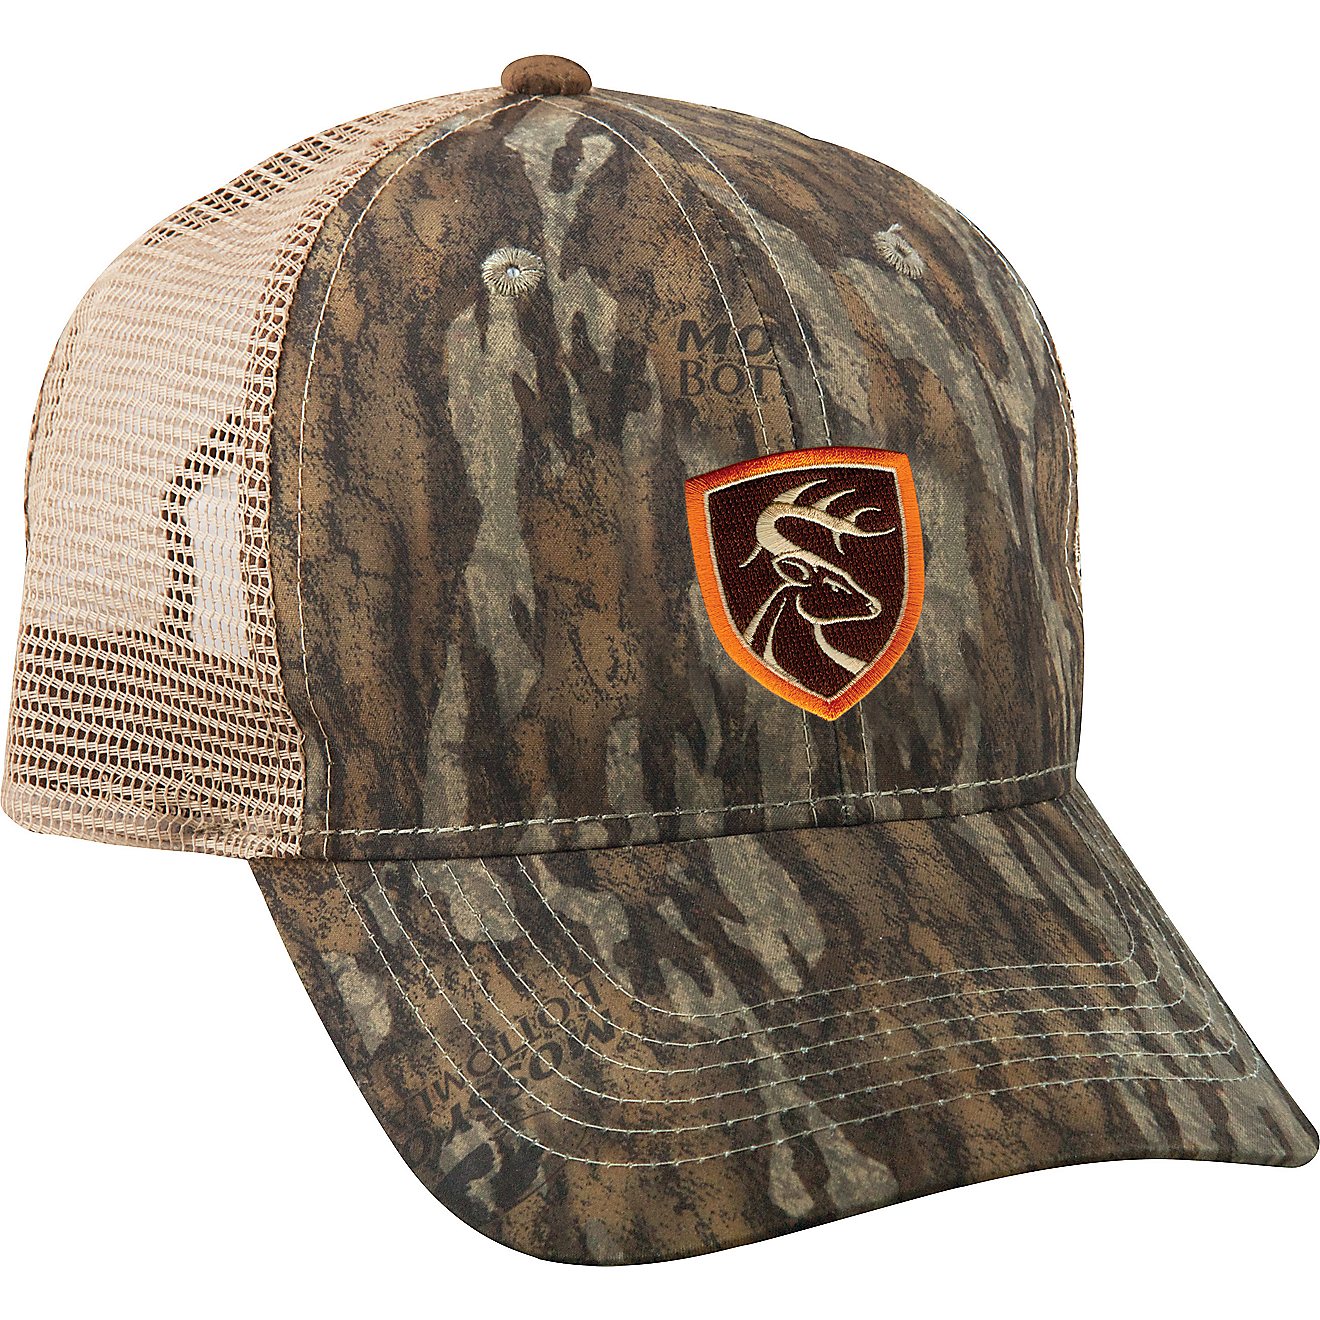 Drake Waterfowl Men's Non-Typical Camo Cap                                                                                       - view number 1